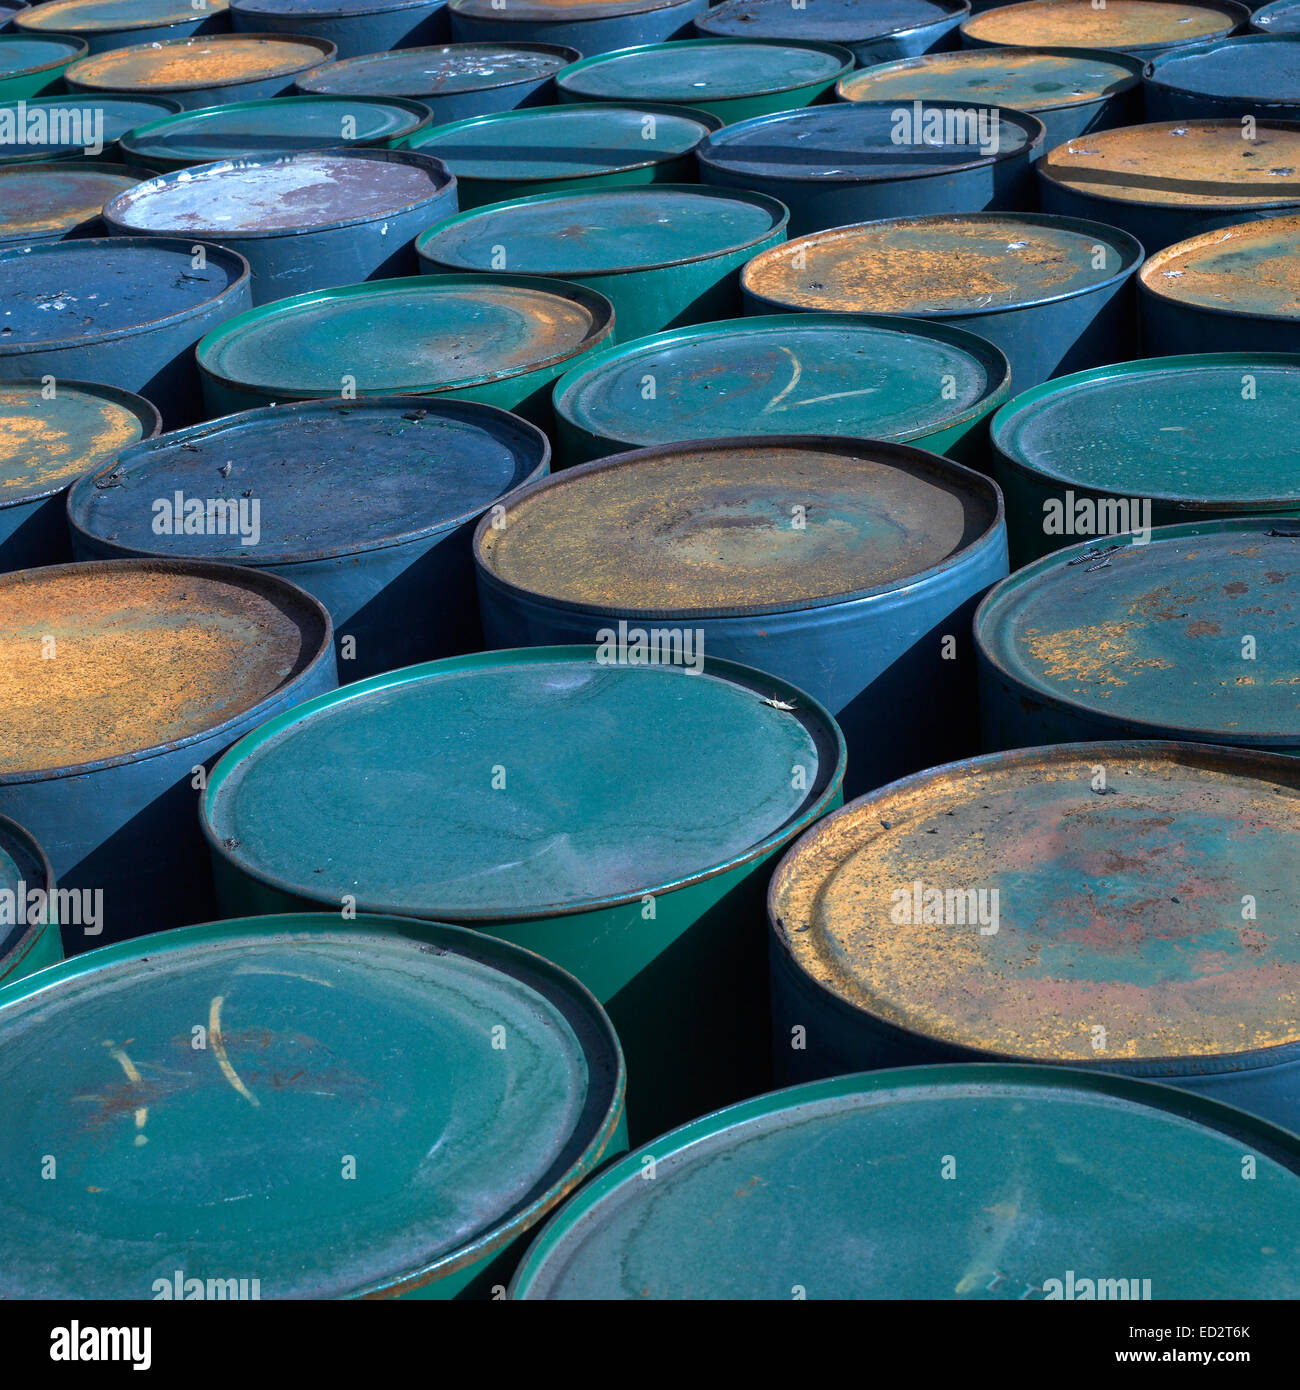 Rows of colorful and rusty barrels Stock Photo